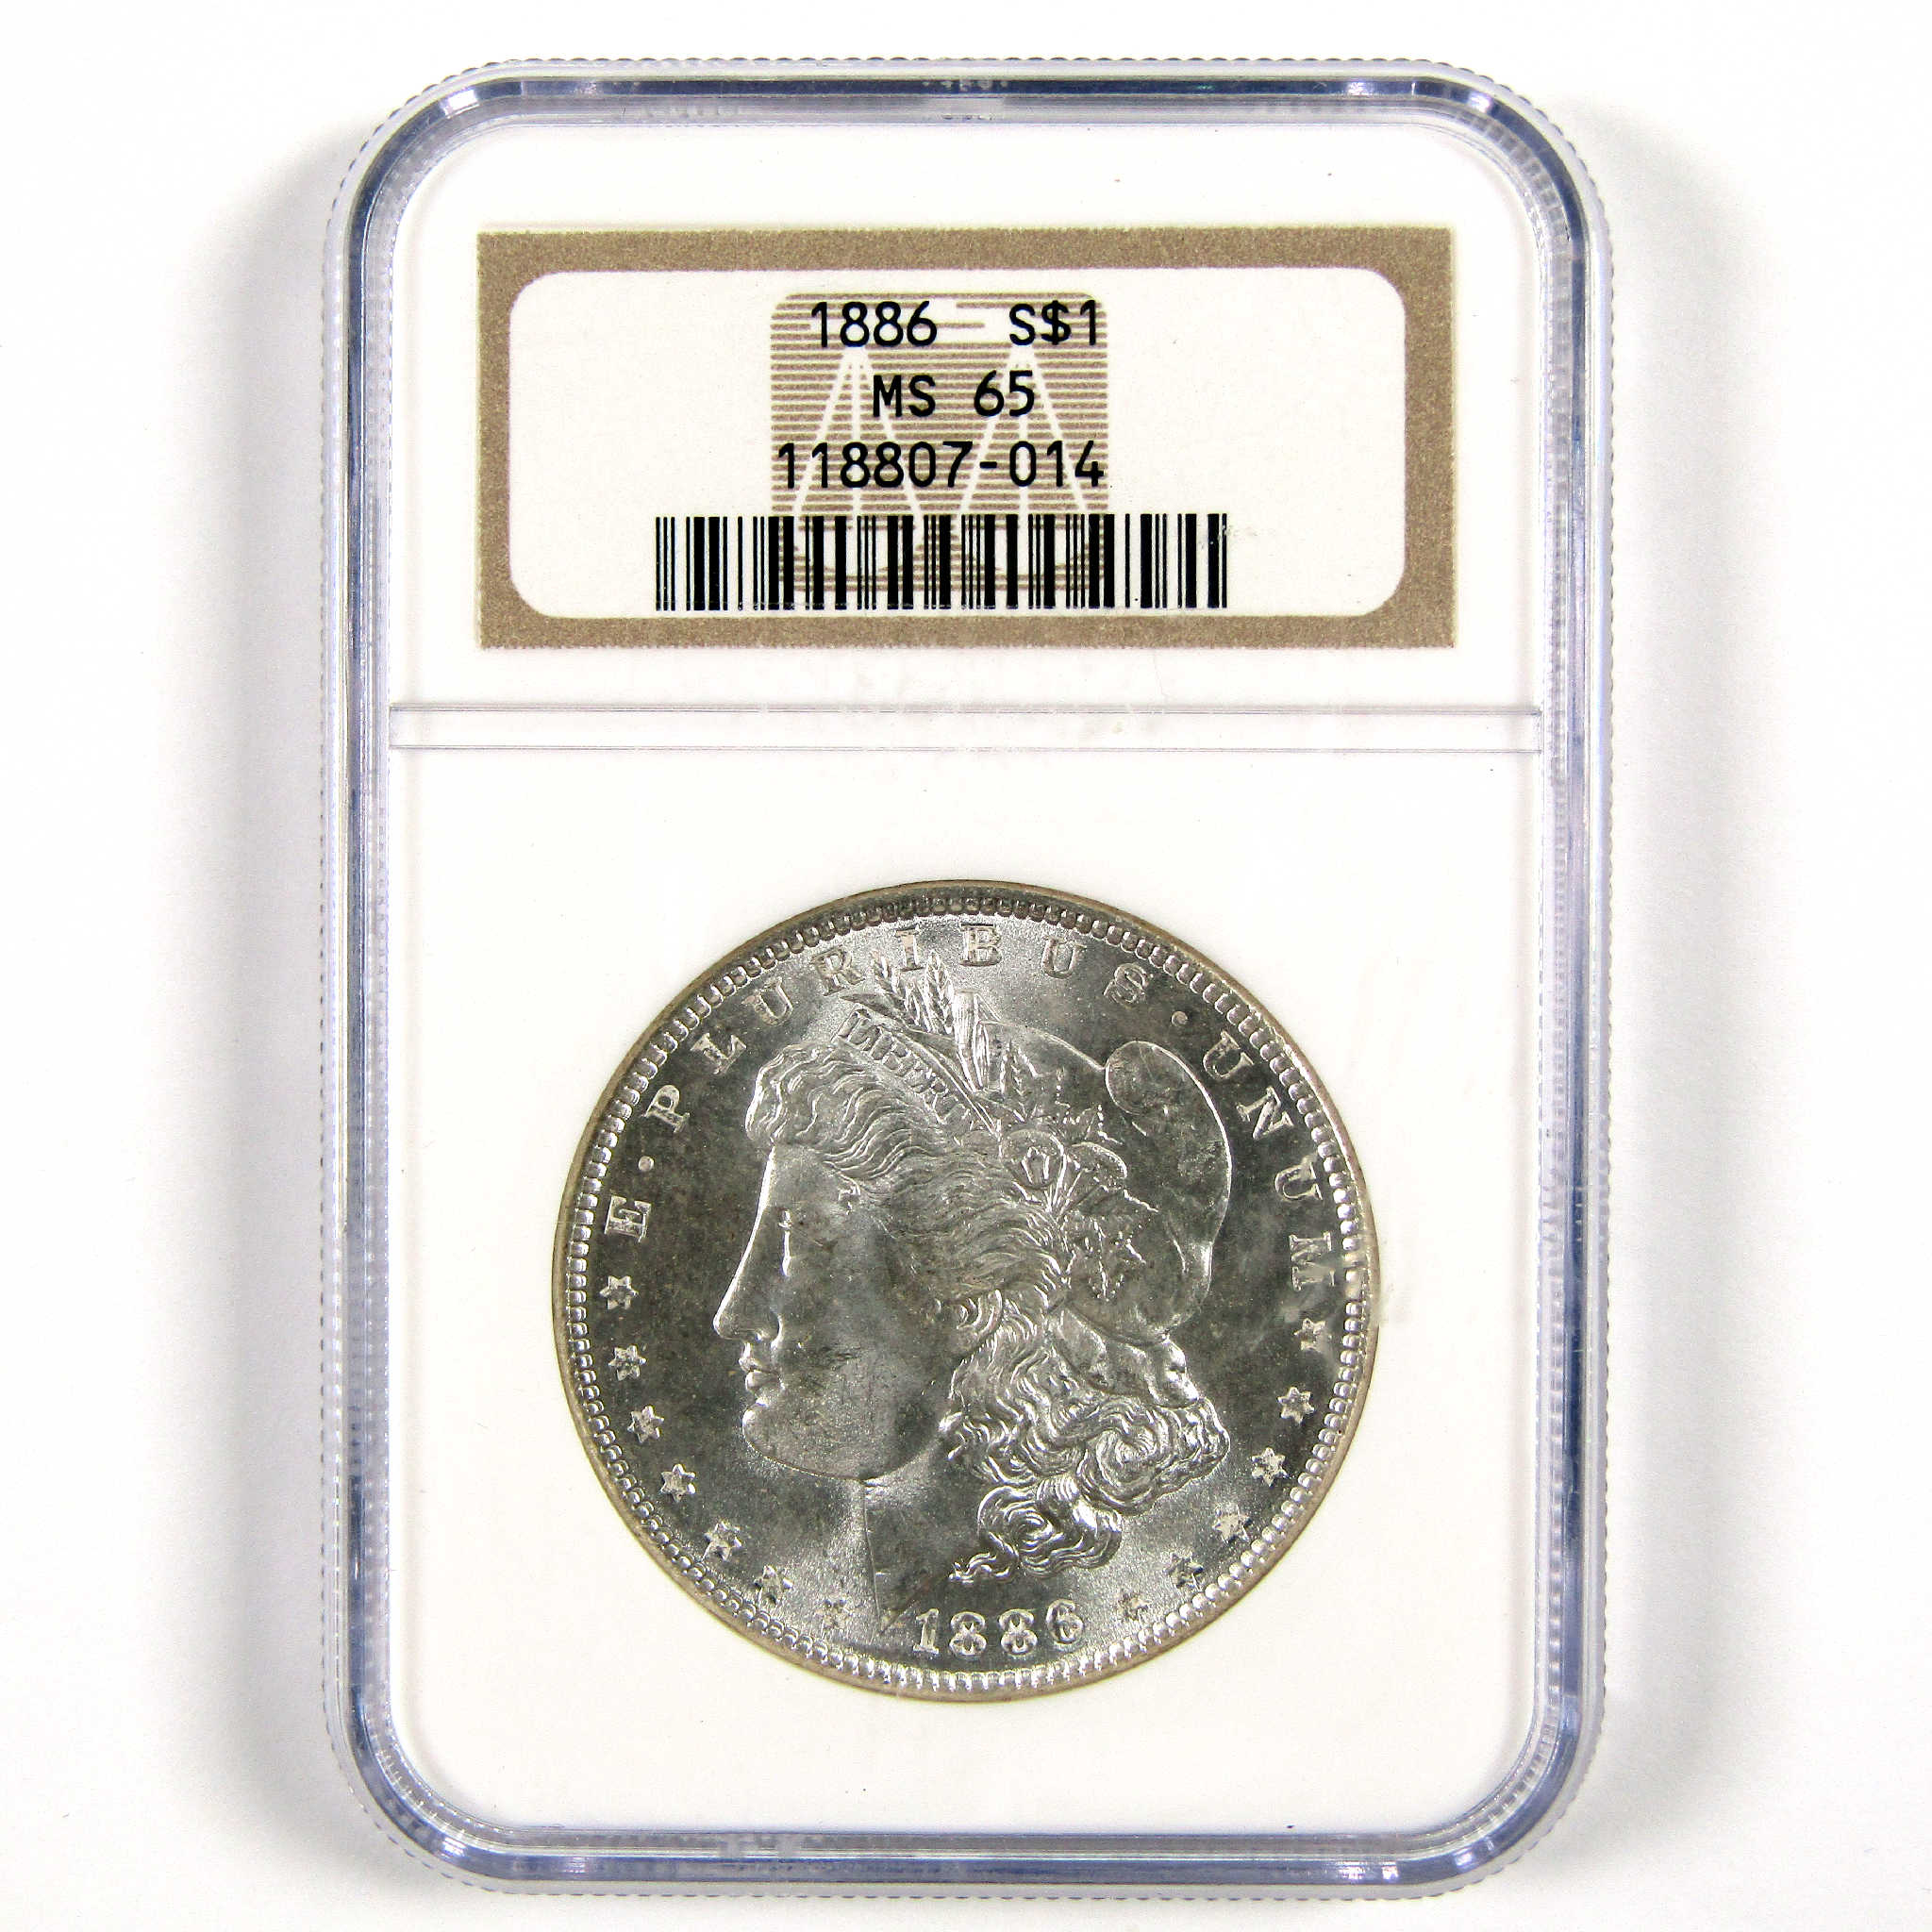 1886 Morgan Dollar MS 65 NGC Silver $1 Uncirculated Coin SKU:CPC6237 - Morgan coin - Morgan silver dollar - Morgan silver dollar for sale - Profile Coins &amp; Collectibles